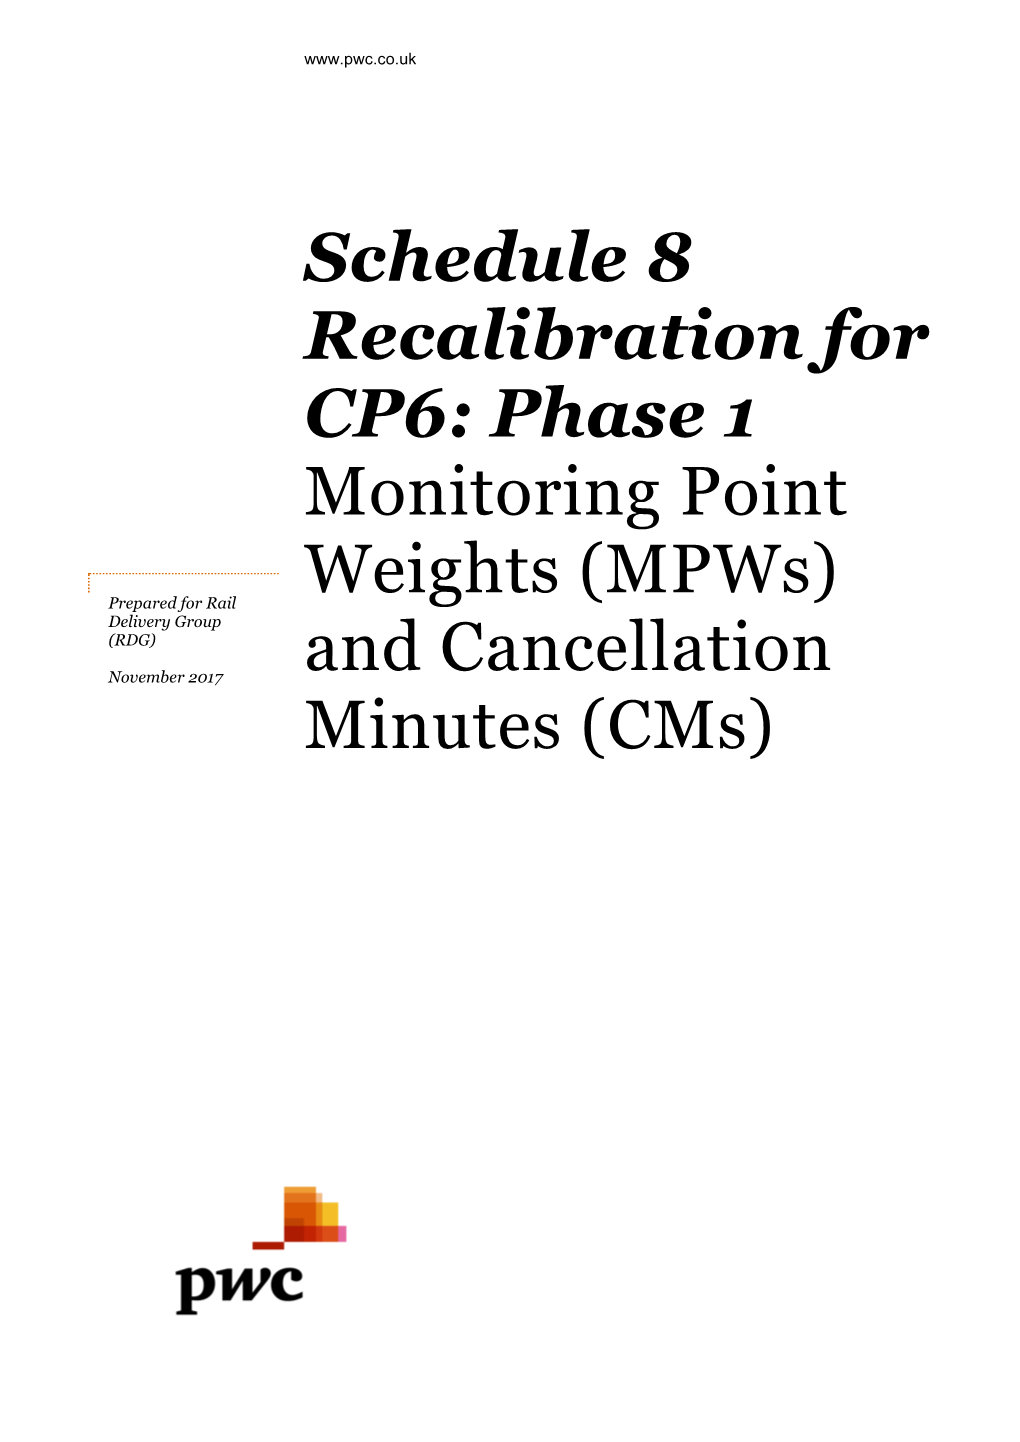 Schedule 8 Recalibration for CP6: Phase 1 Monitoring Point